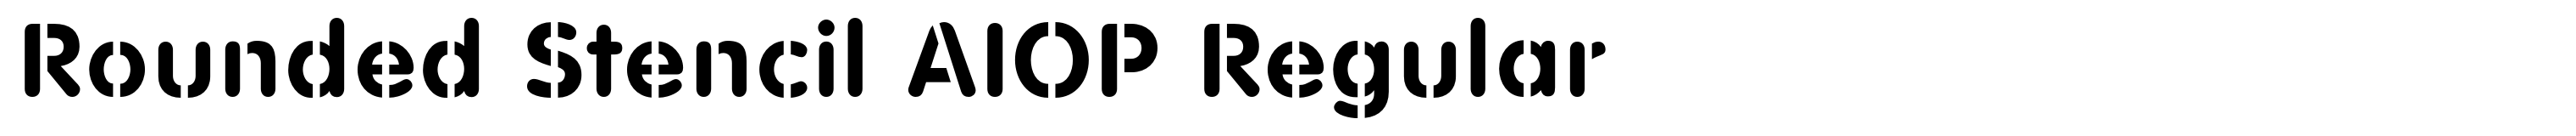 Rounded Stencil AIOP Regular